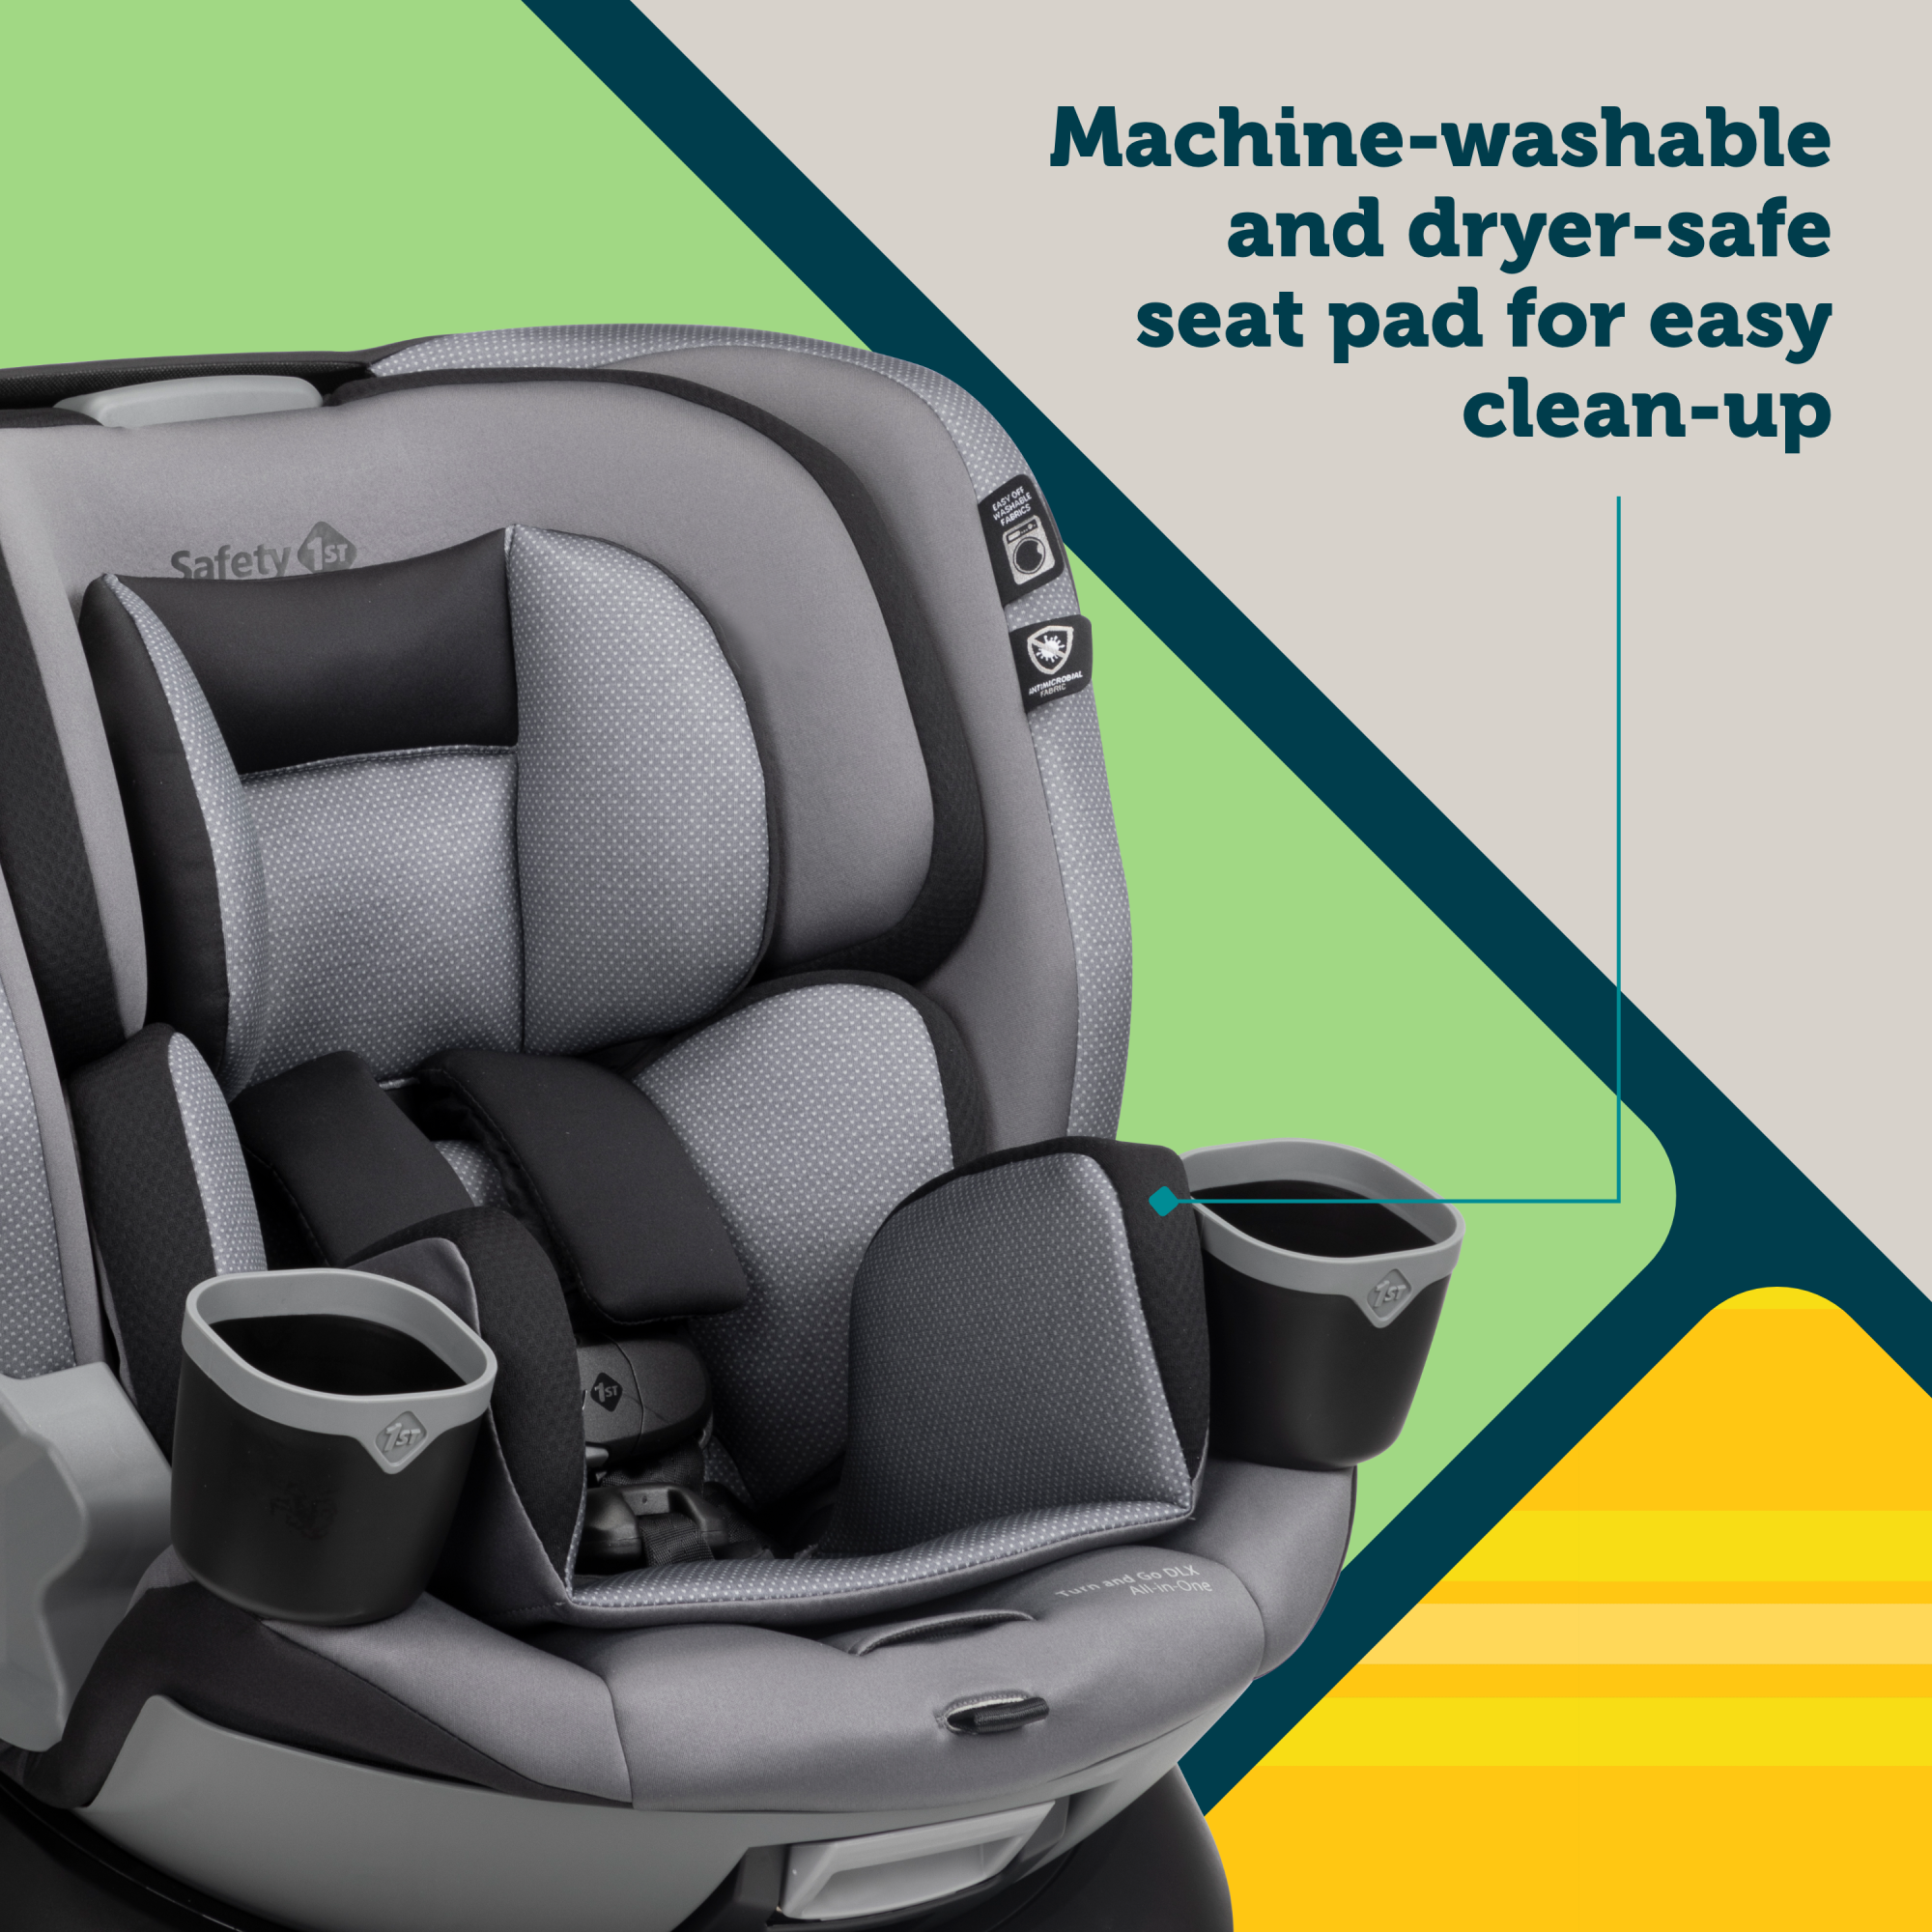 Turn and Go 360 DLX Rotating All-in-One Convertible Car Seat - seat pad is machine-washable and dryer-safe for easy clean-up